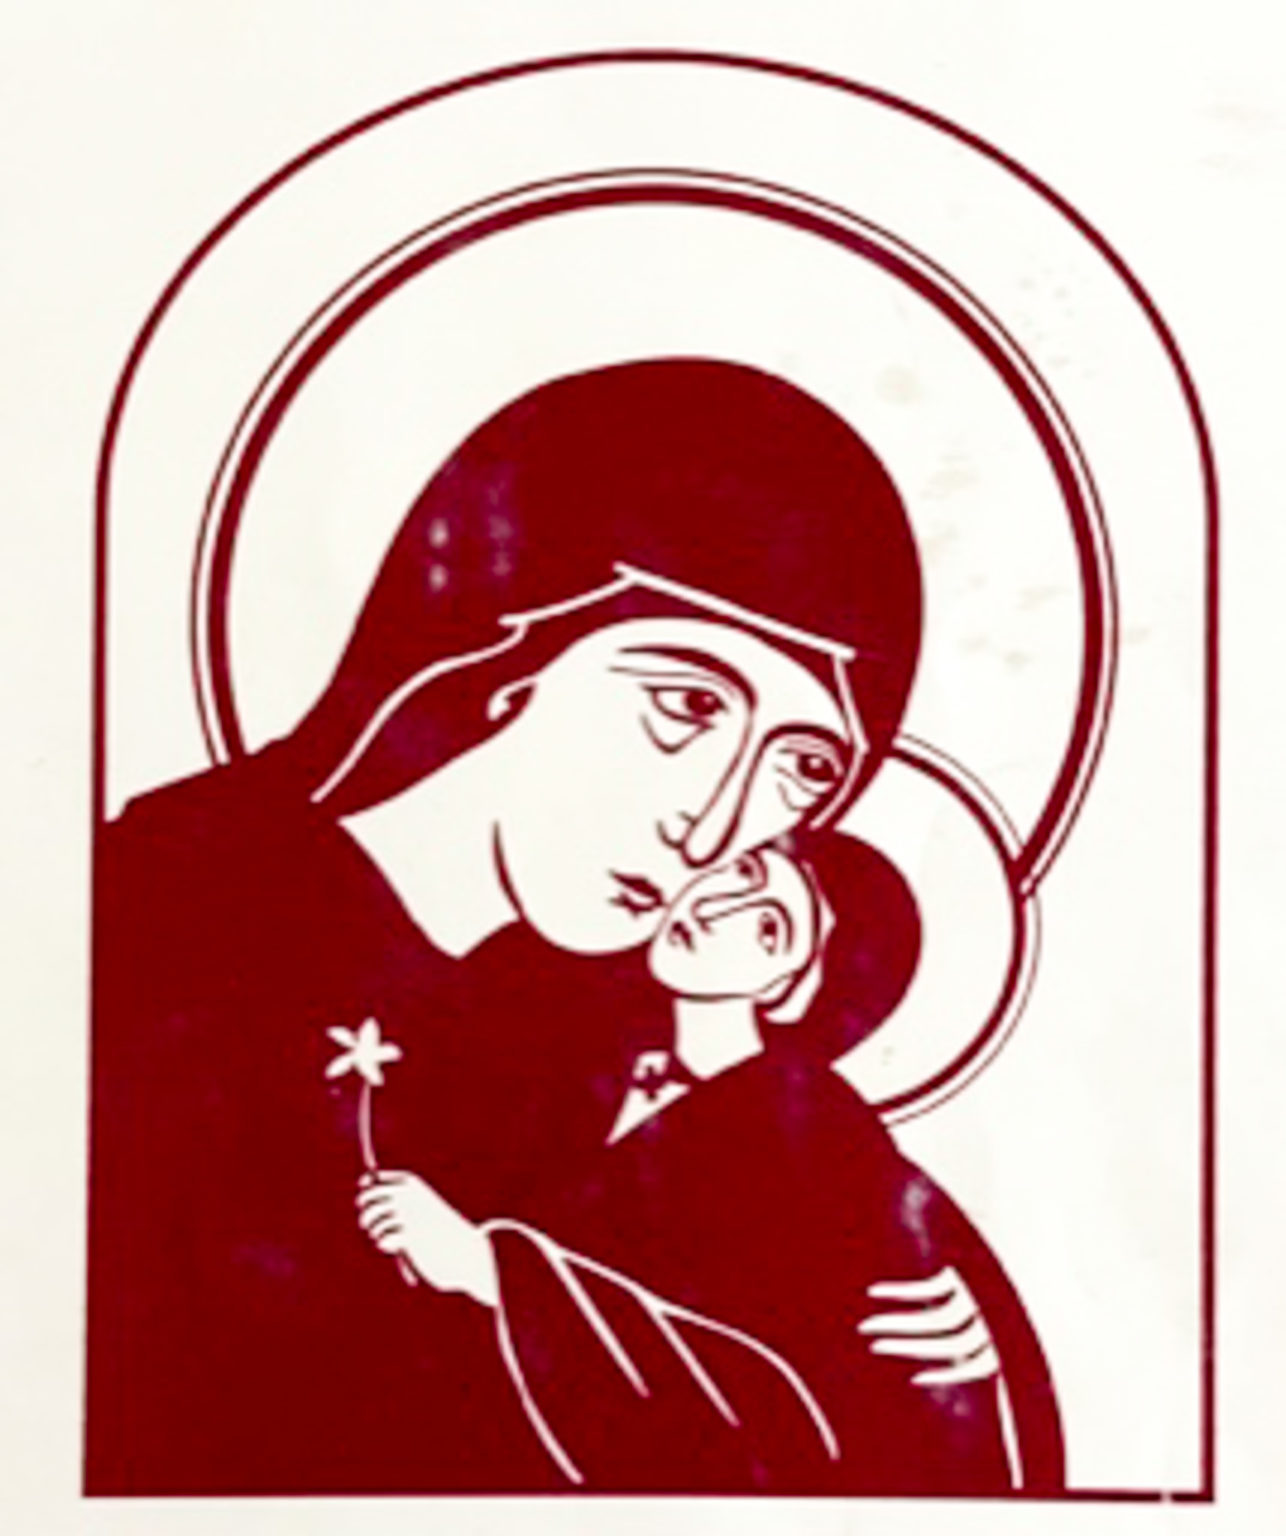 St. Anne hugging young daughter Mary, mother of Jesus. Woodcut image maroon on white